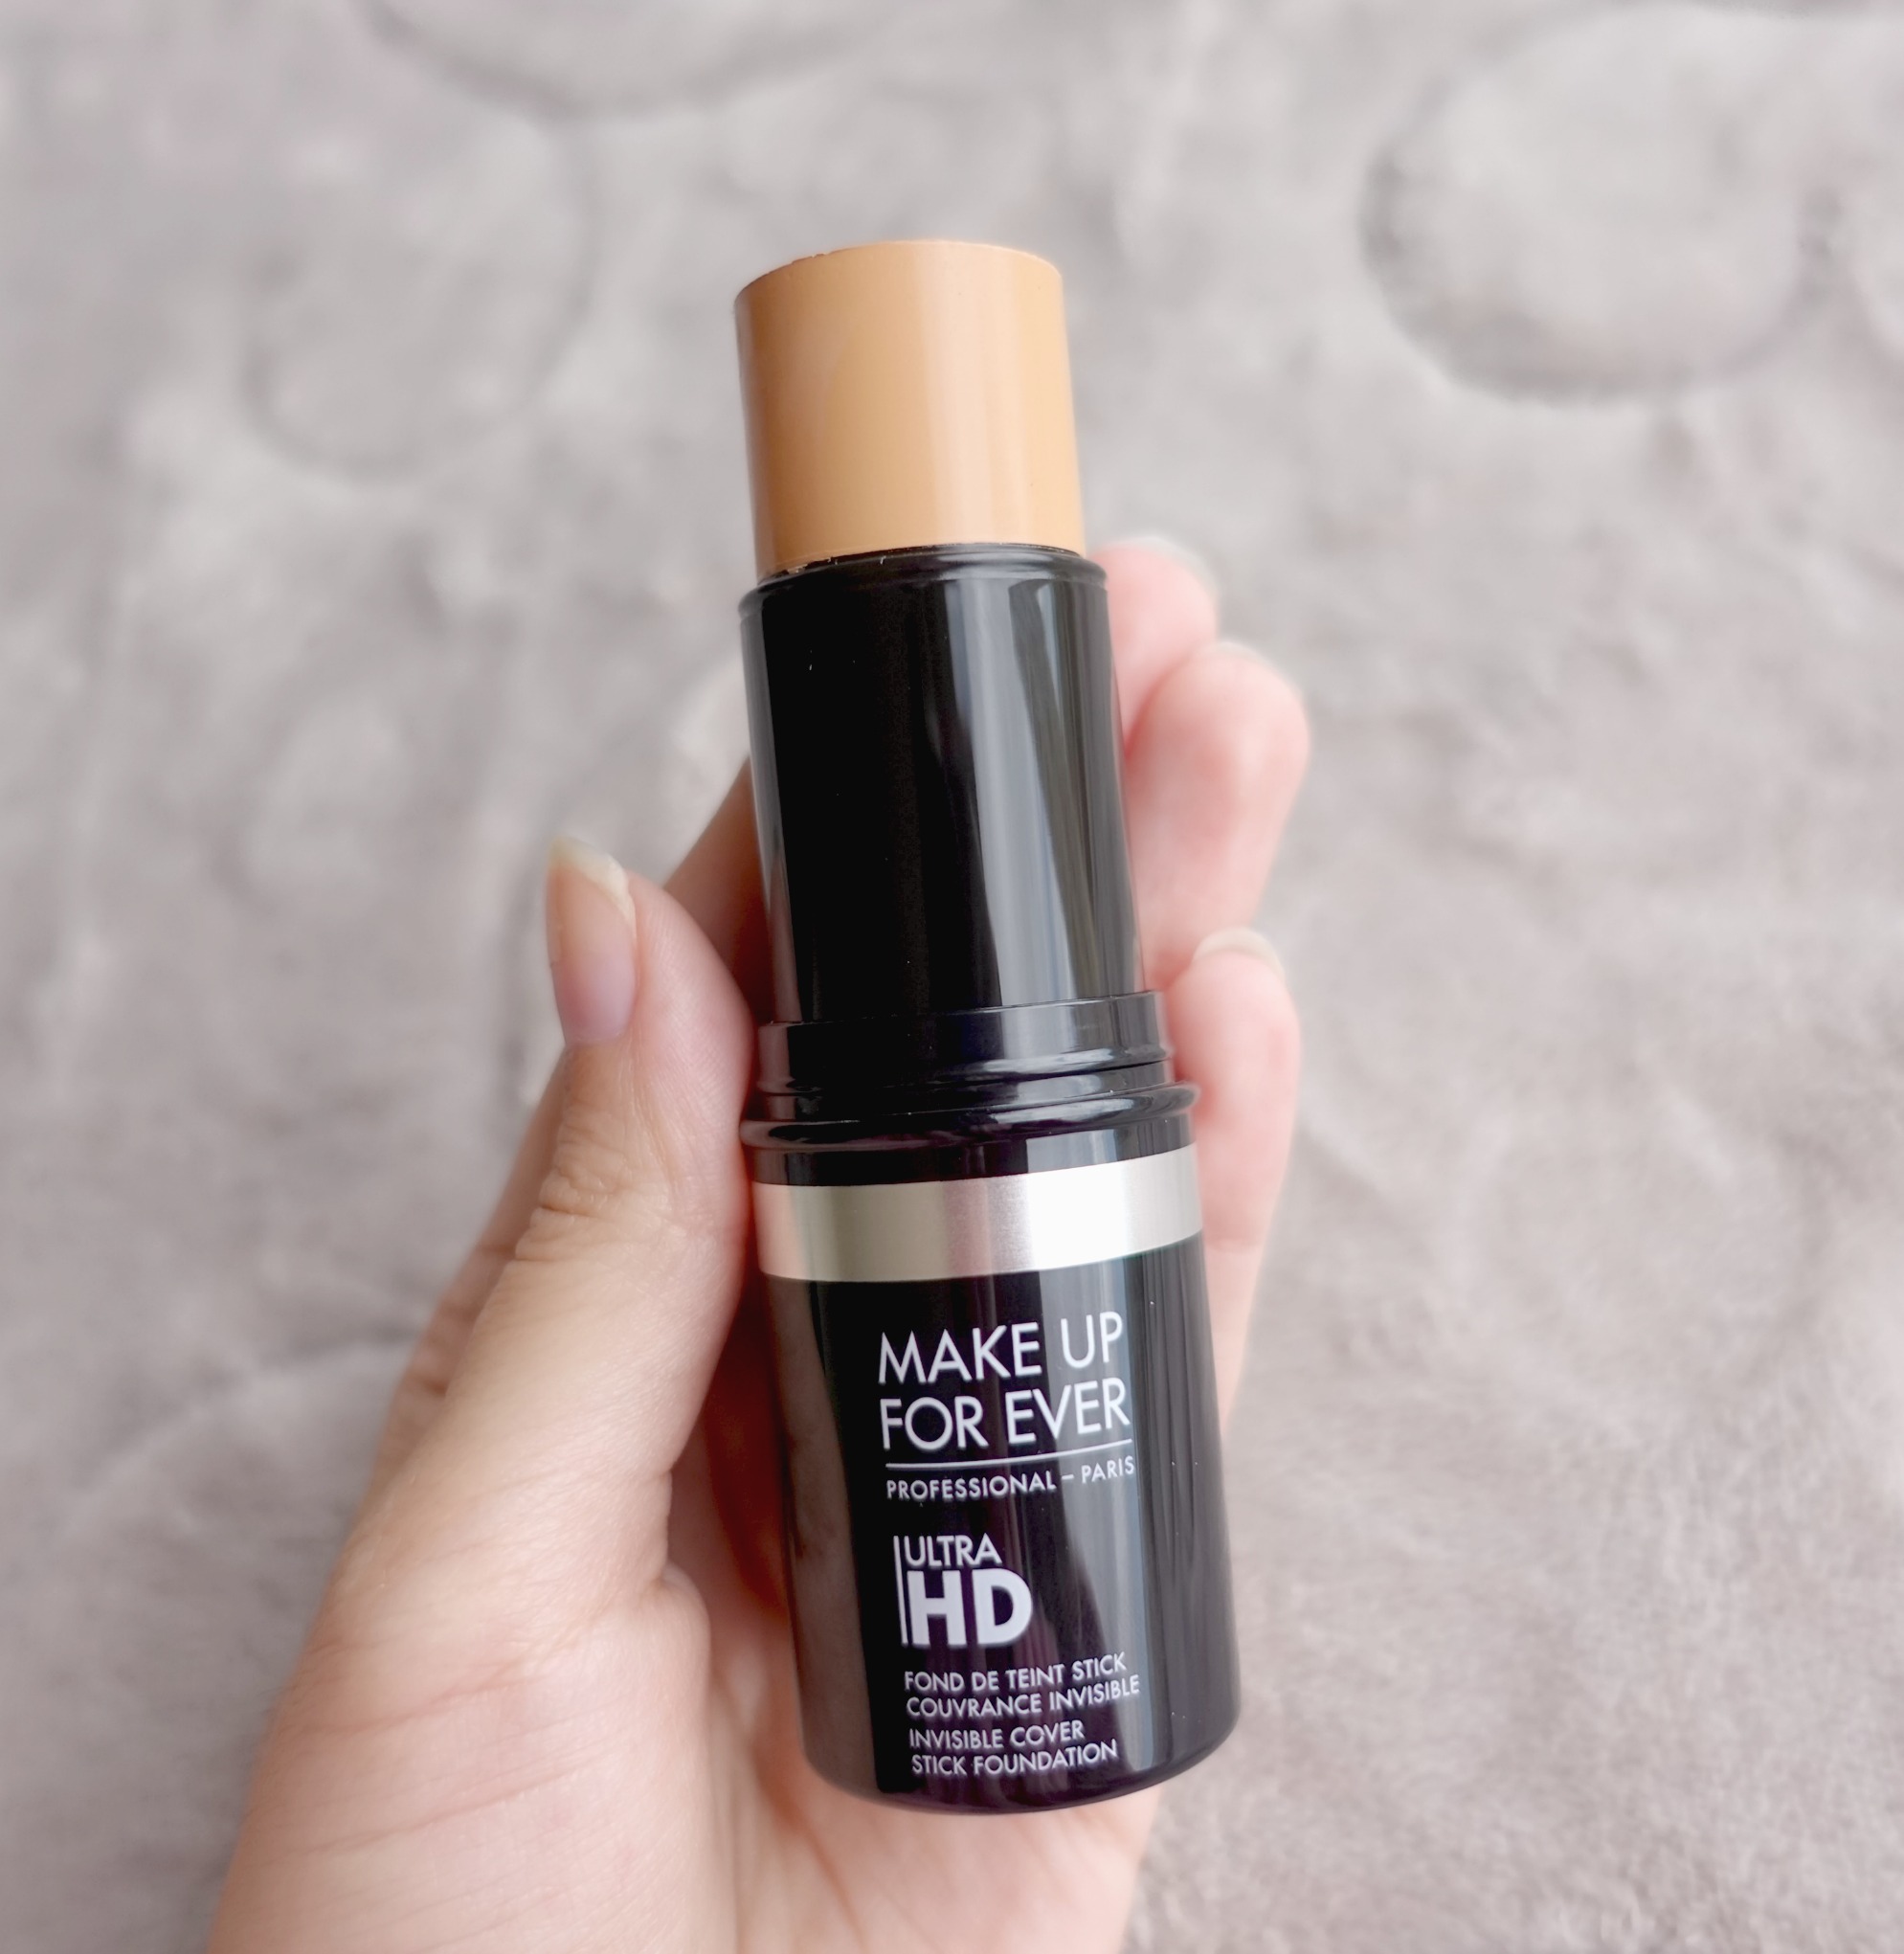 Makeup forever hd foundation 120